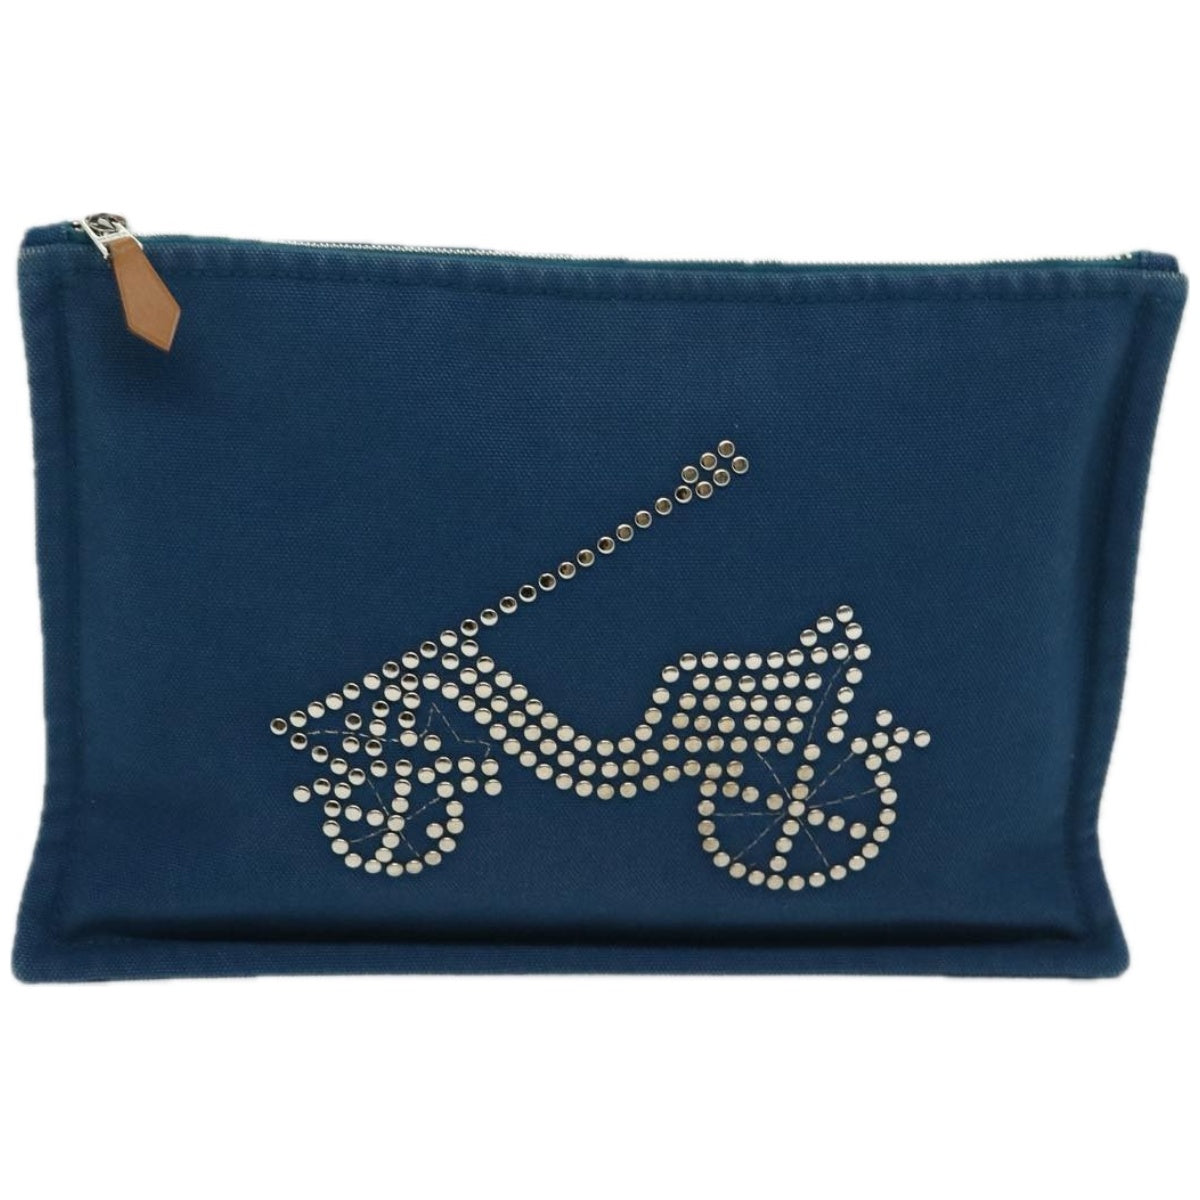 HERMES Pouch Canvas Blue Auth bs12426